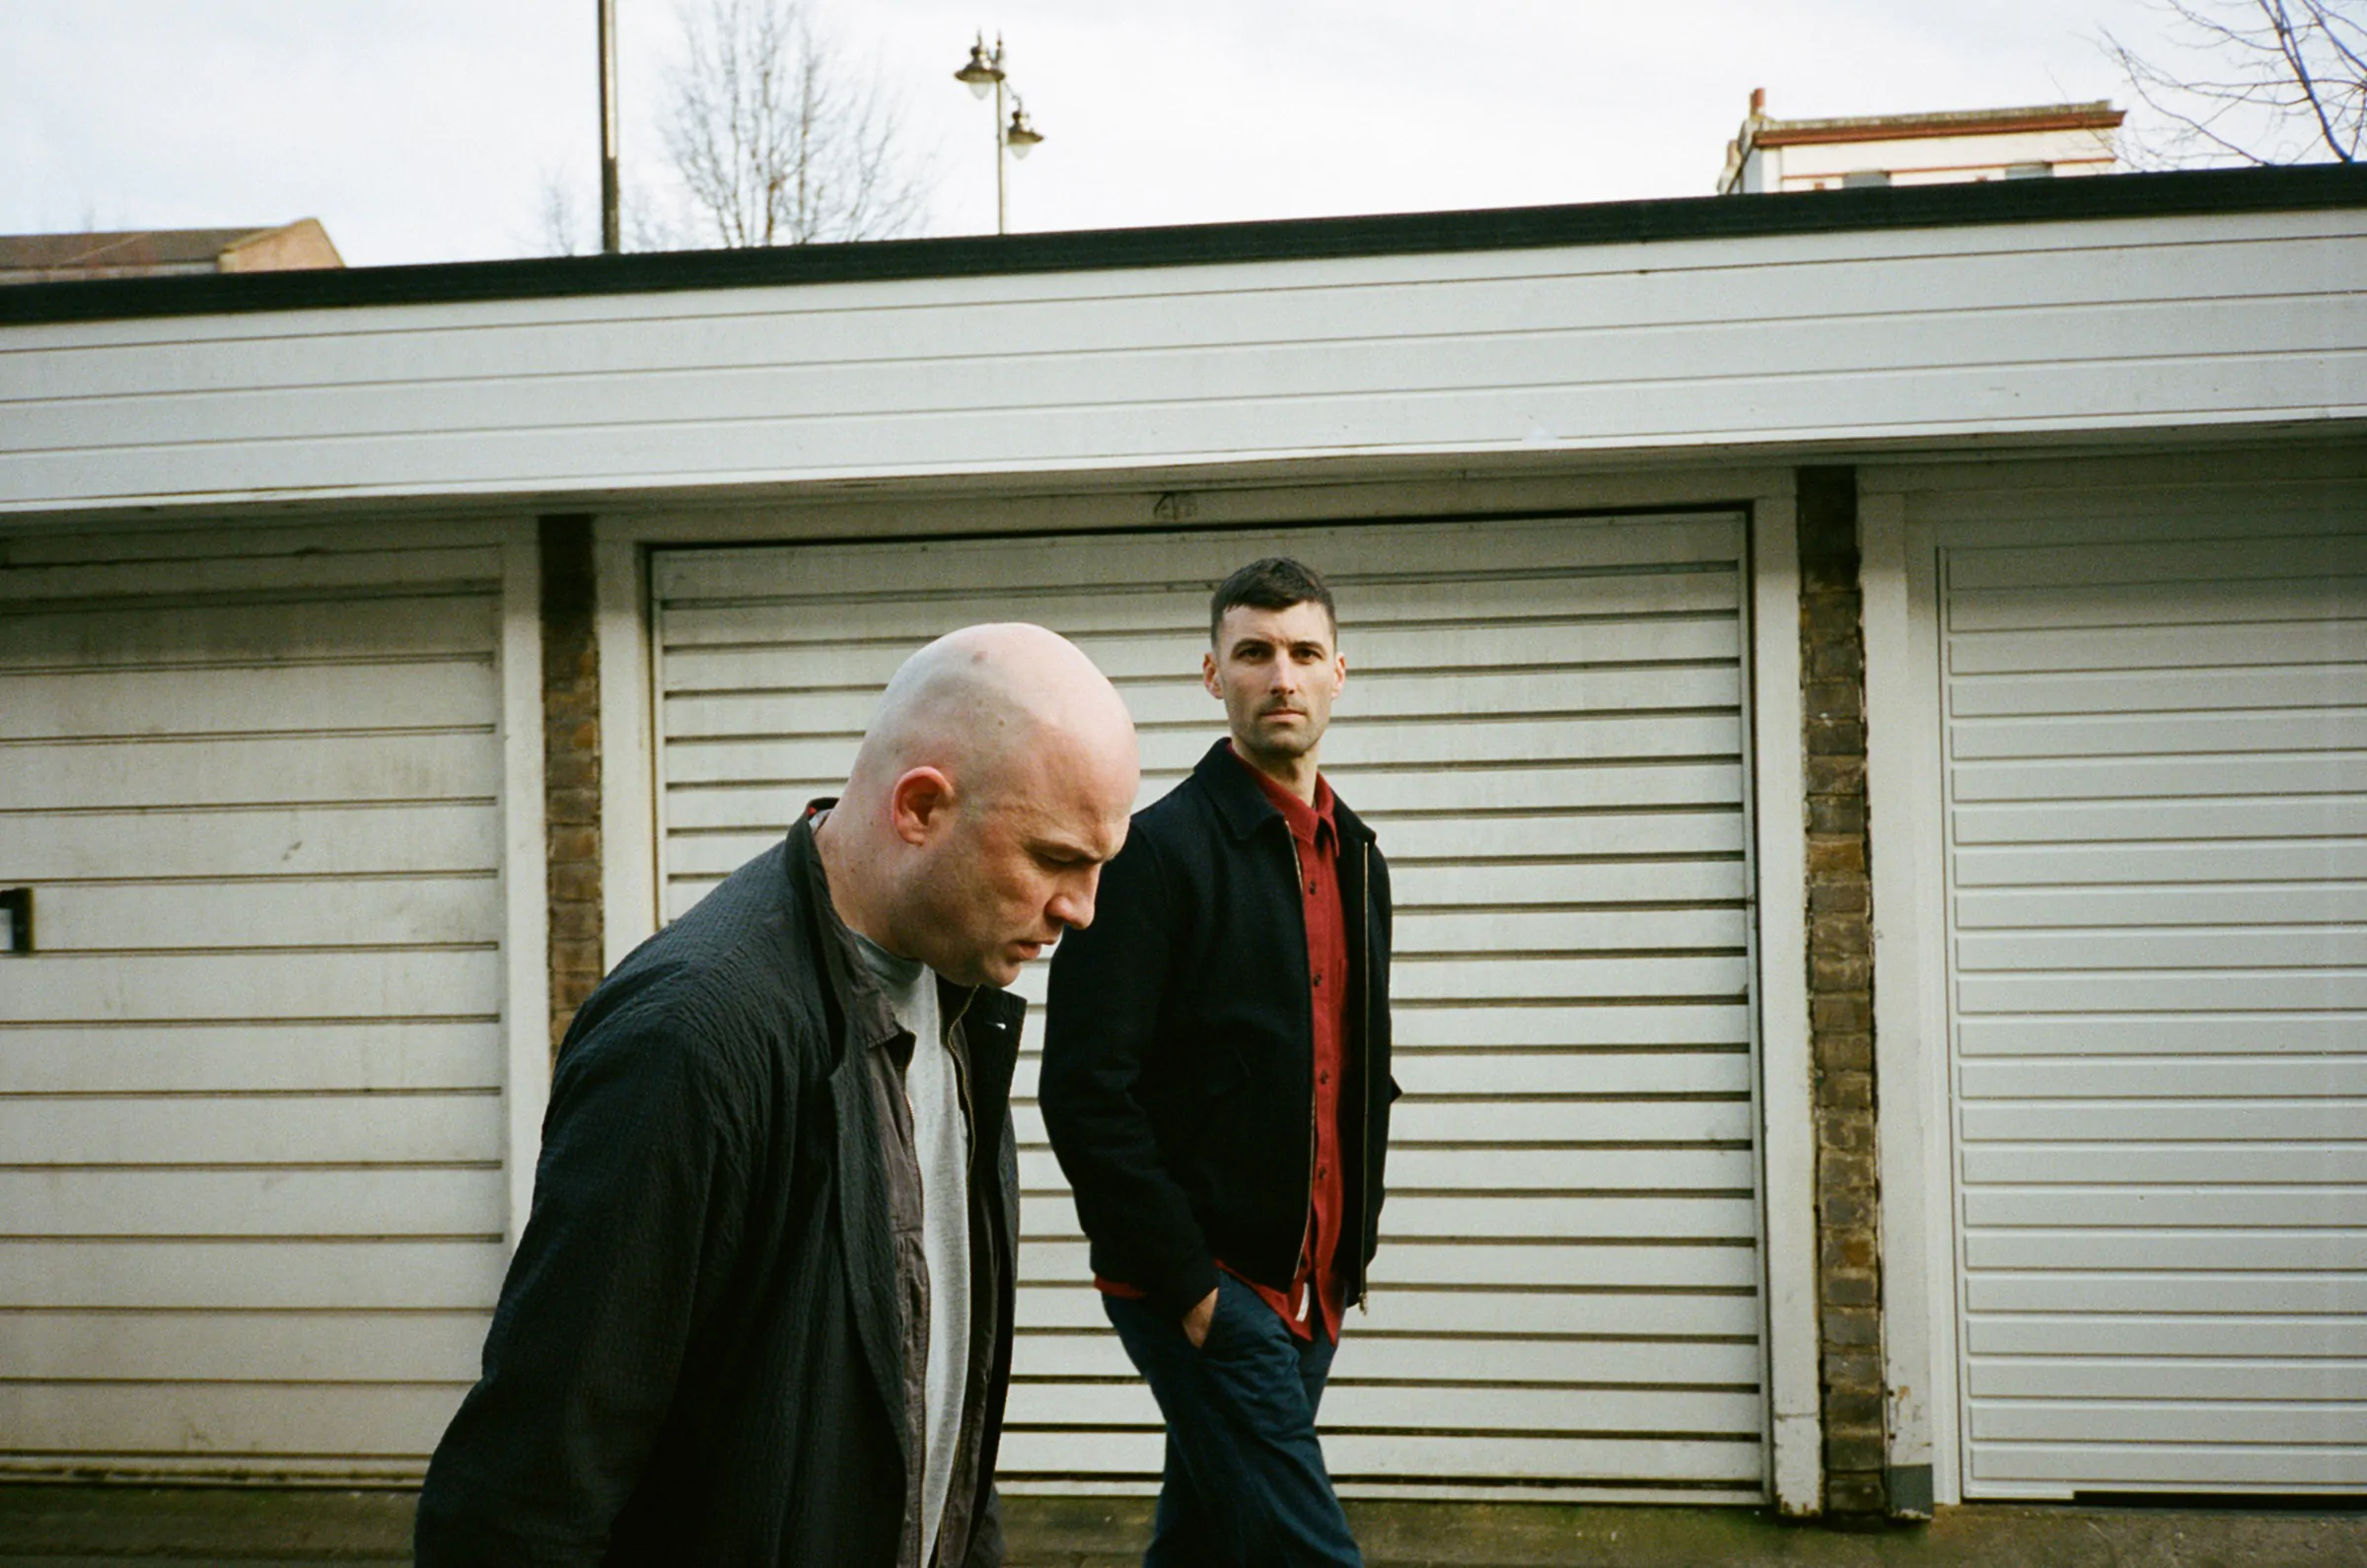 DARKSTAR share tribute to venues lost and under threat in ‘Blurred’ Video – Watch Now